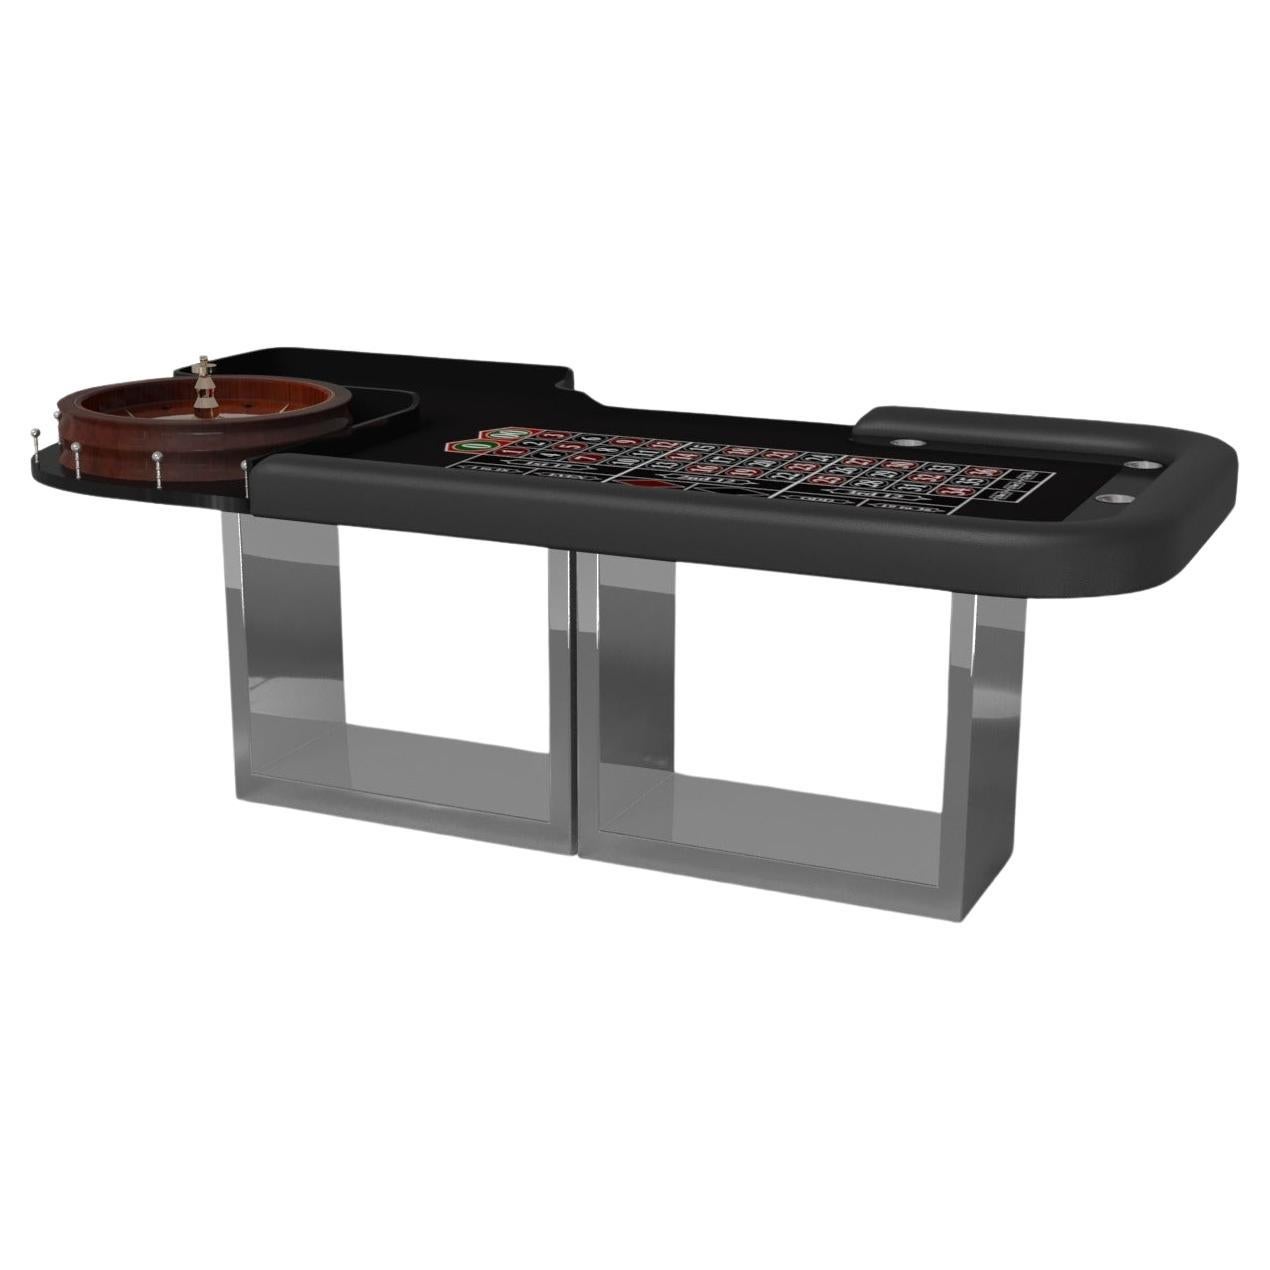 Elevate Customs Ambrosia Roulette Table/Stainless Steel Sheet Metal in 8'2" -USA For Sale